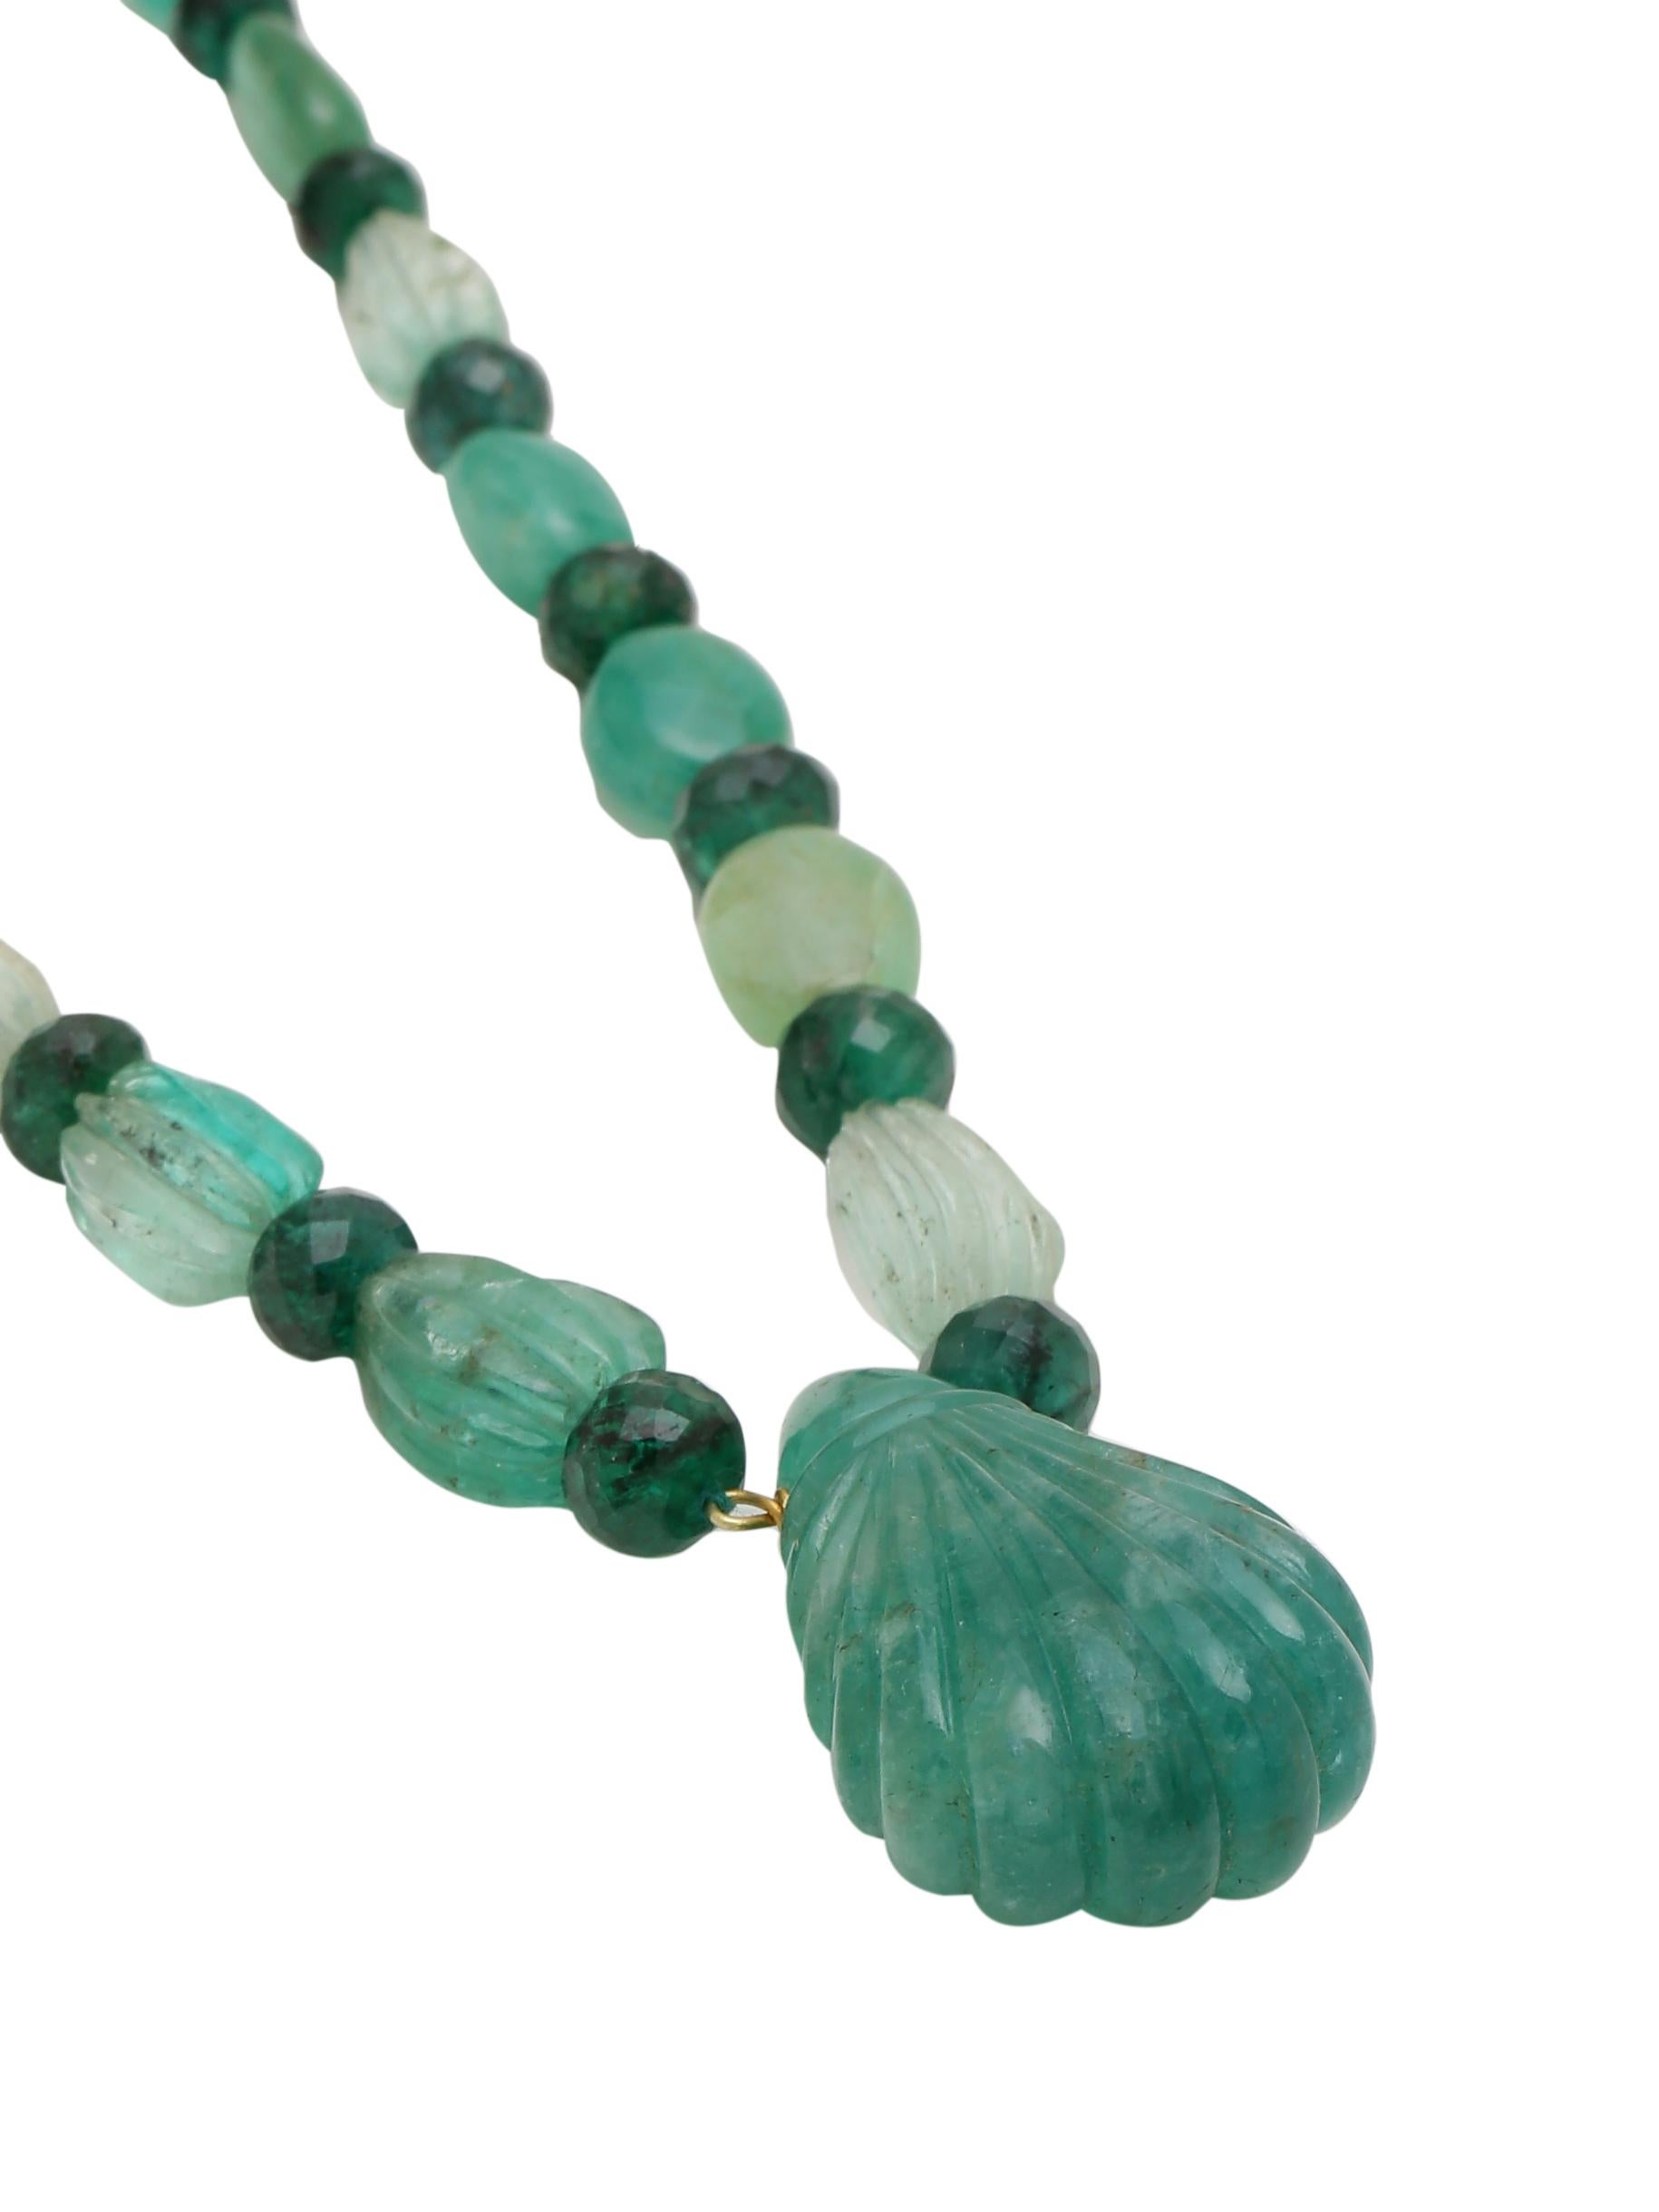 Different shades of natural Emerald carefully selected and strung together to form this exquisite necklace. The Emeralds are hand carved and some are Facetted. The big Carved drop centre weighs 55.51 carats on its own. The Emeralds are all natural.